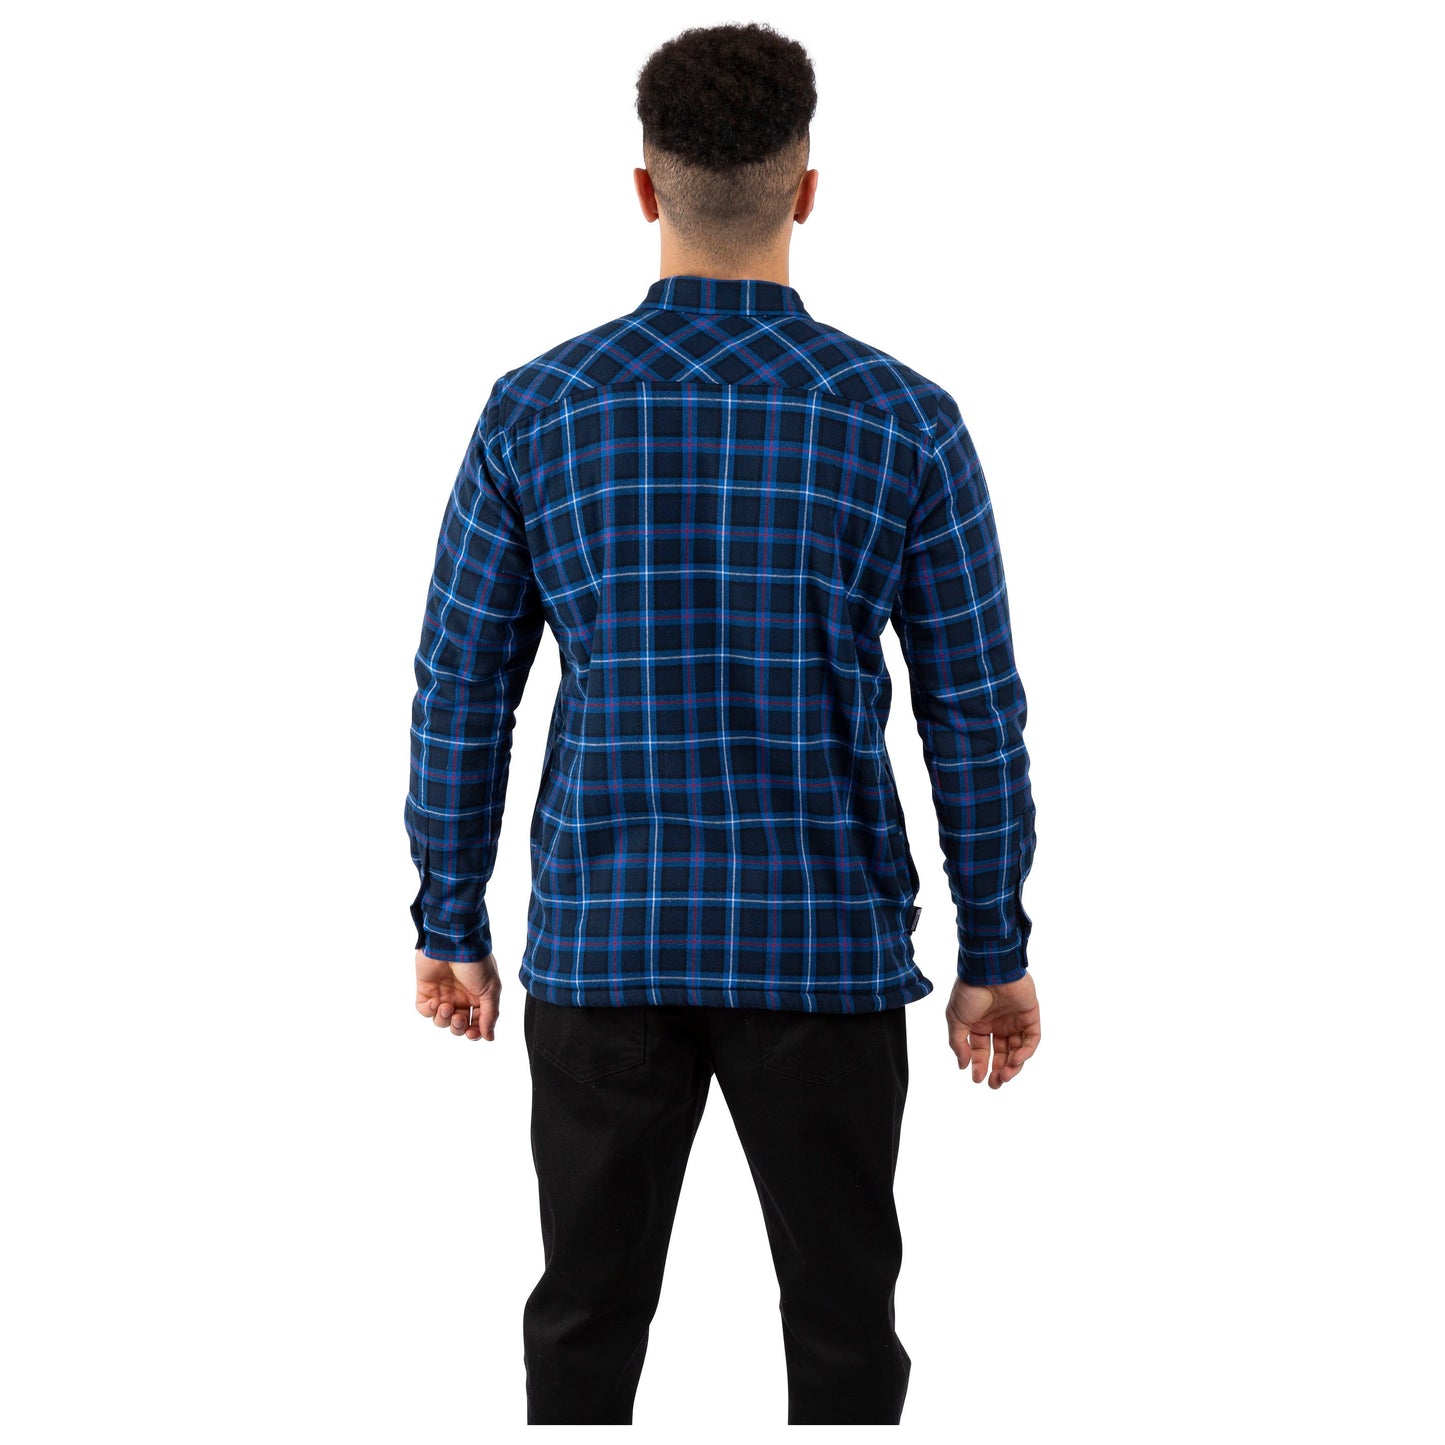 Rapeseed Men's Check Shirt with Sherpa Lining in Dark Blue Check